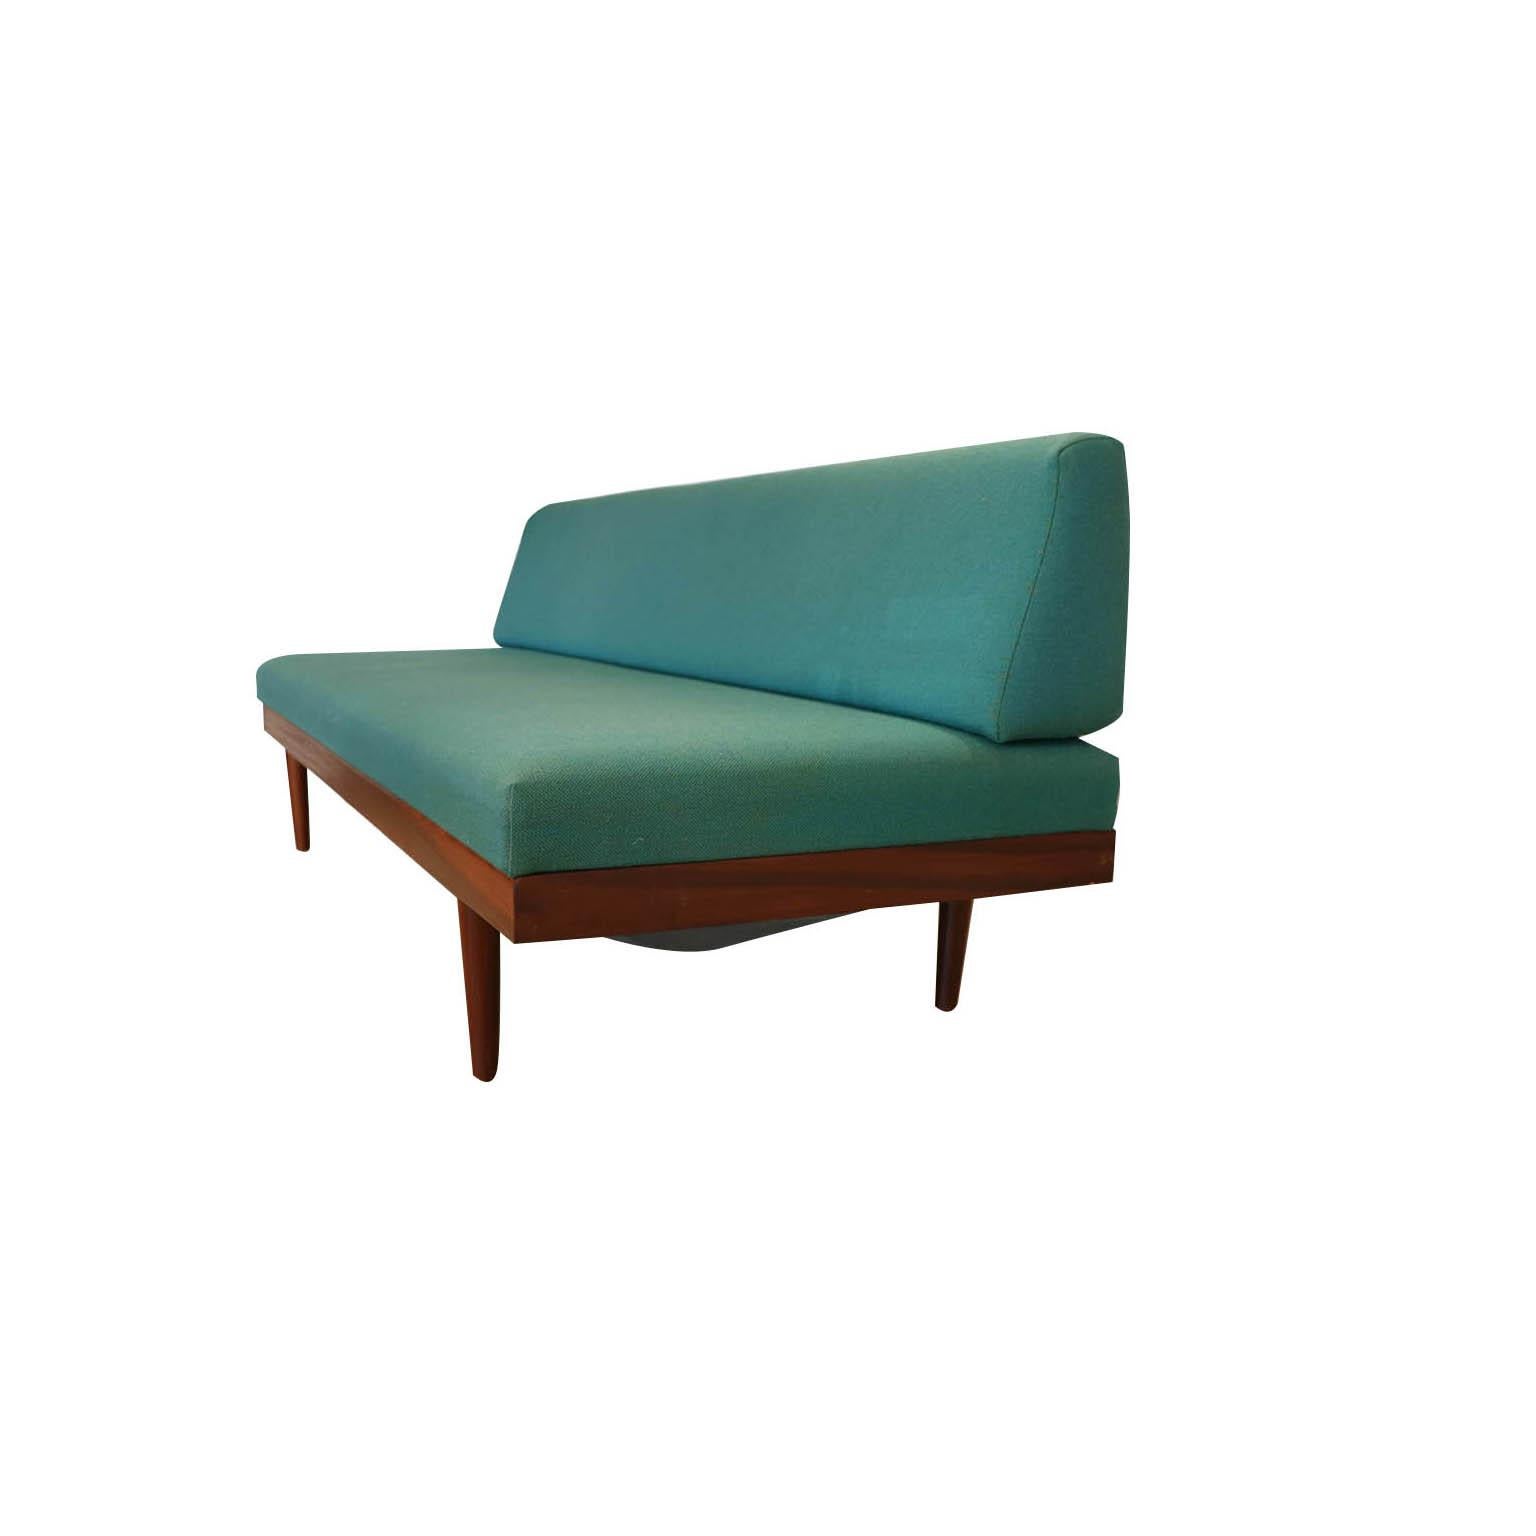 A stunning and comfortable midcentury sofa made in Norway, designed by Edvard Kindt for Gustav Bahus. Featuring a cushion back and single seat cushion upholstered in original attractive teal fabric in fantastic condition, no rips or tears. The